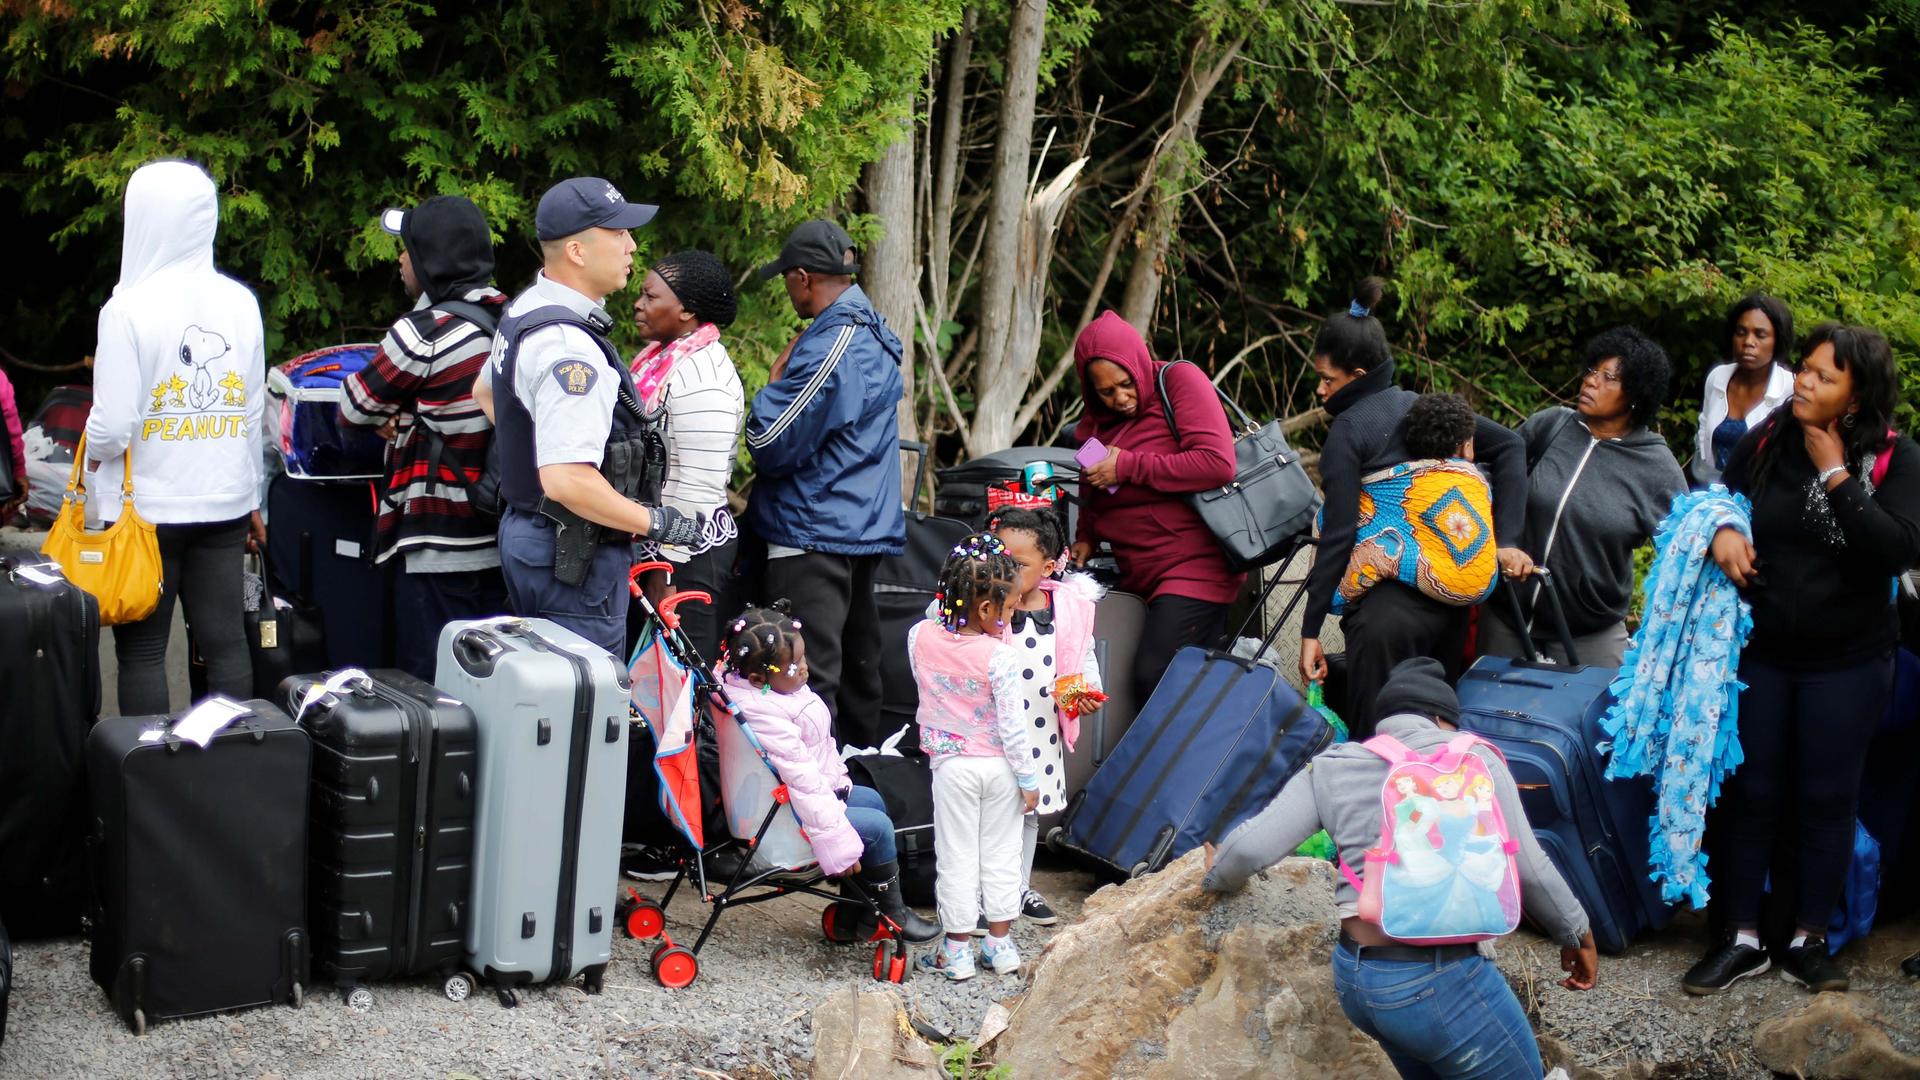 A Royal Canadian Mounted Police (RCMP) officer announces to a group of asylum-seekers that they will be crossing illegally into Canada as they wait in line to to enter at the US-Canada border in Champlain, New York, August 7, 2017.